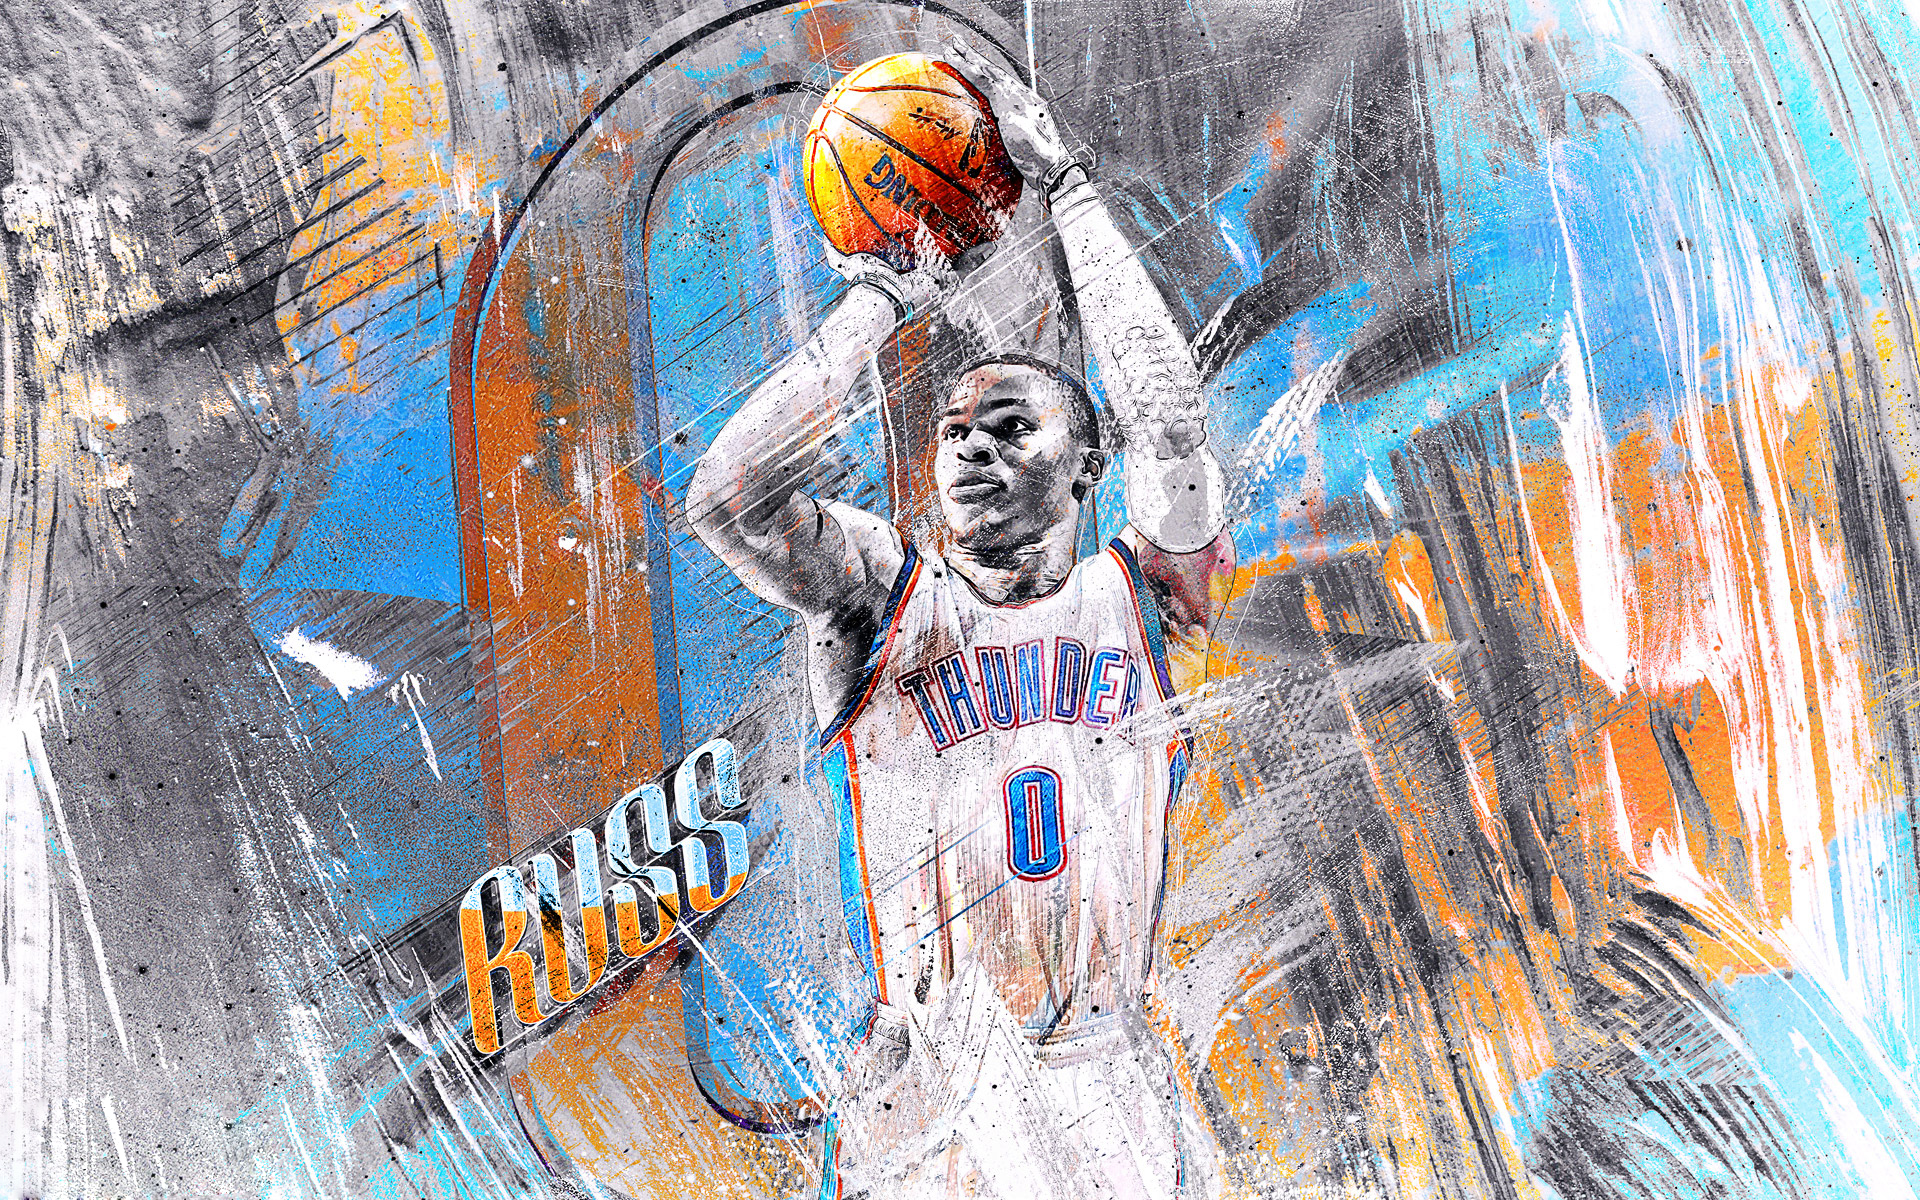 Russell Westbrook 2016 Wallpapers